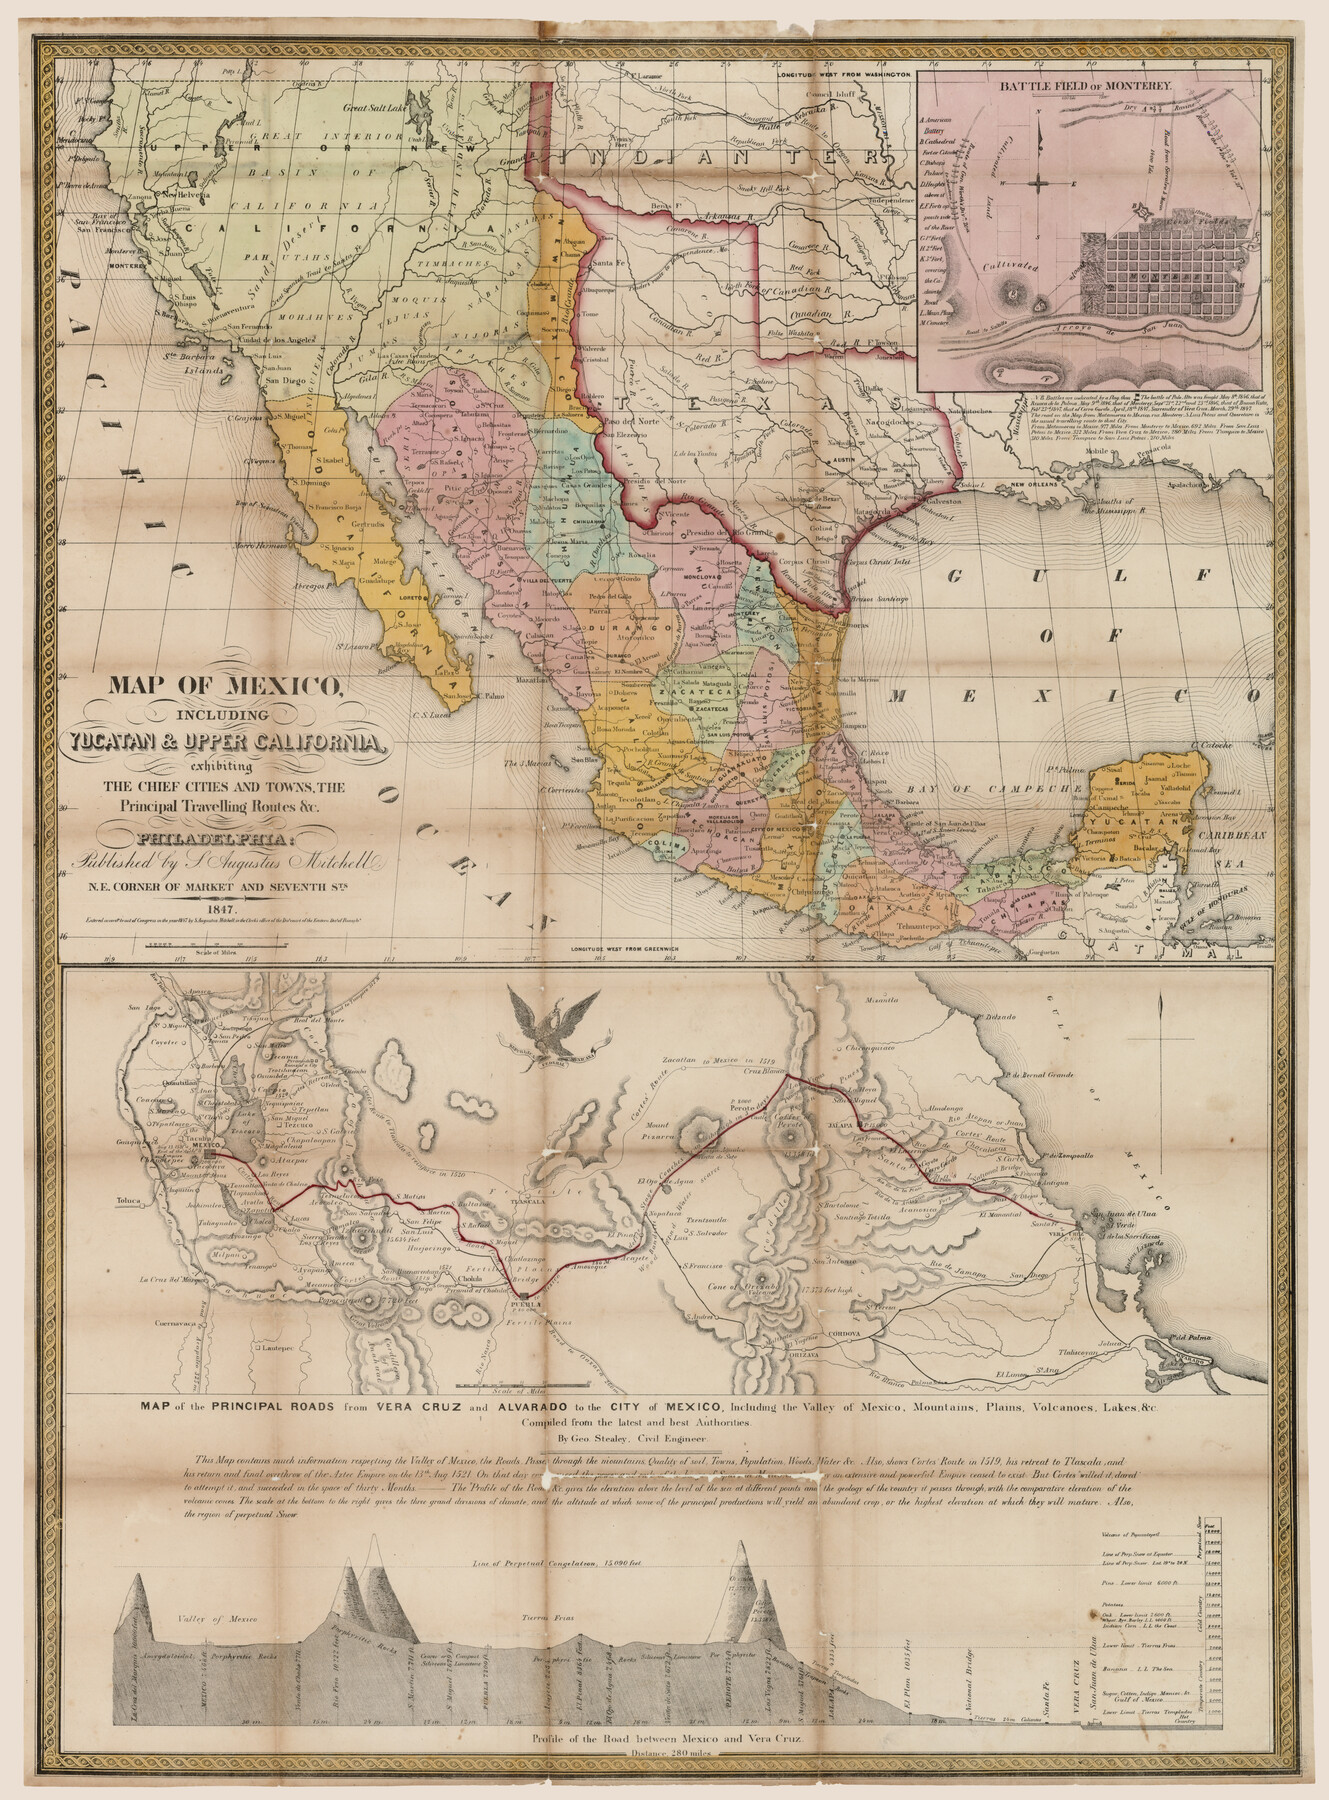 93936, Map of Mexico, including Yucatan & Upper California, exhibiting the chief cities and towns, the principal travelling routes &c., Rees-Jones Digital Map Collection